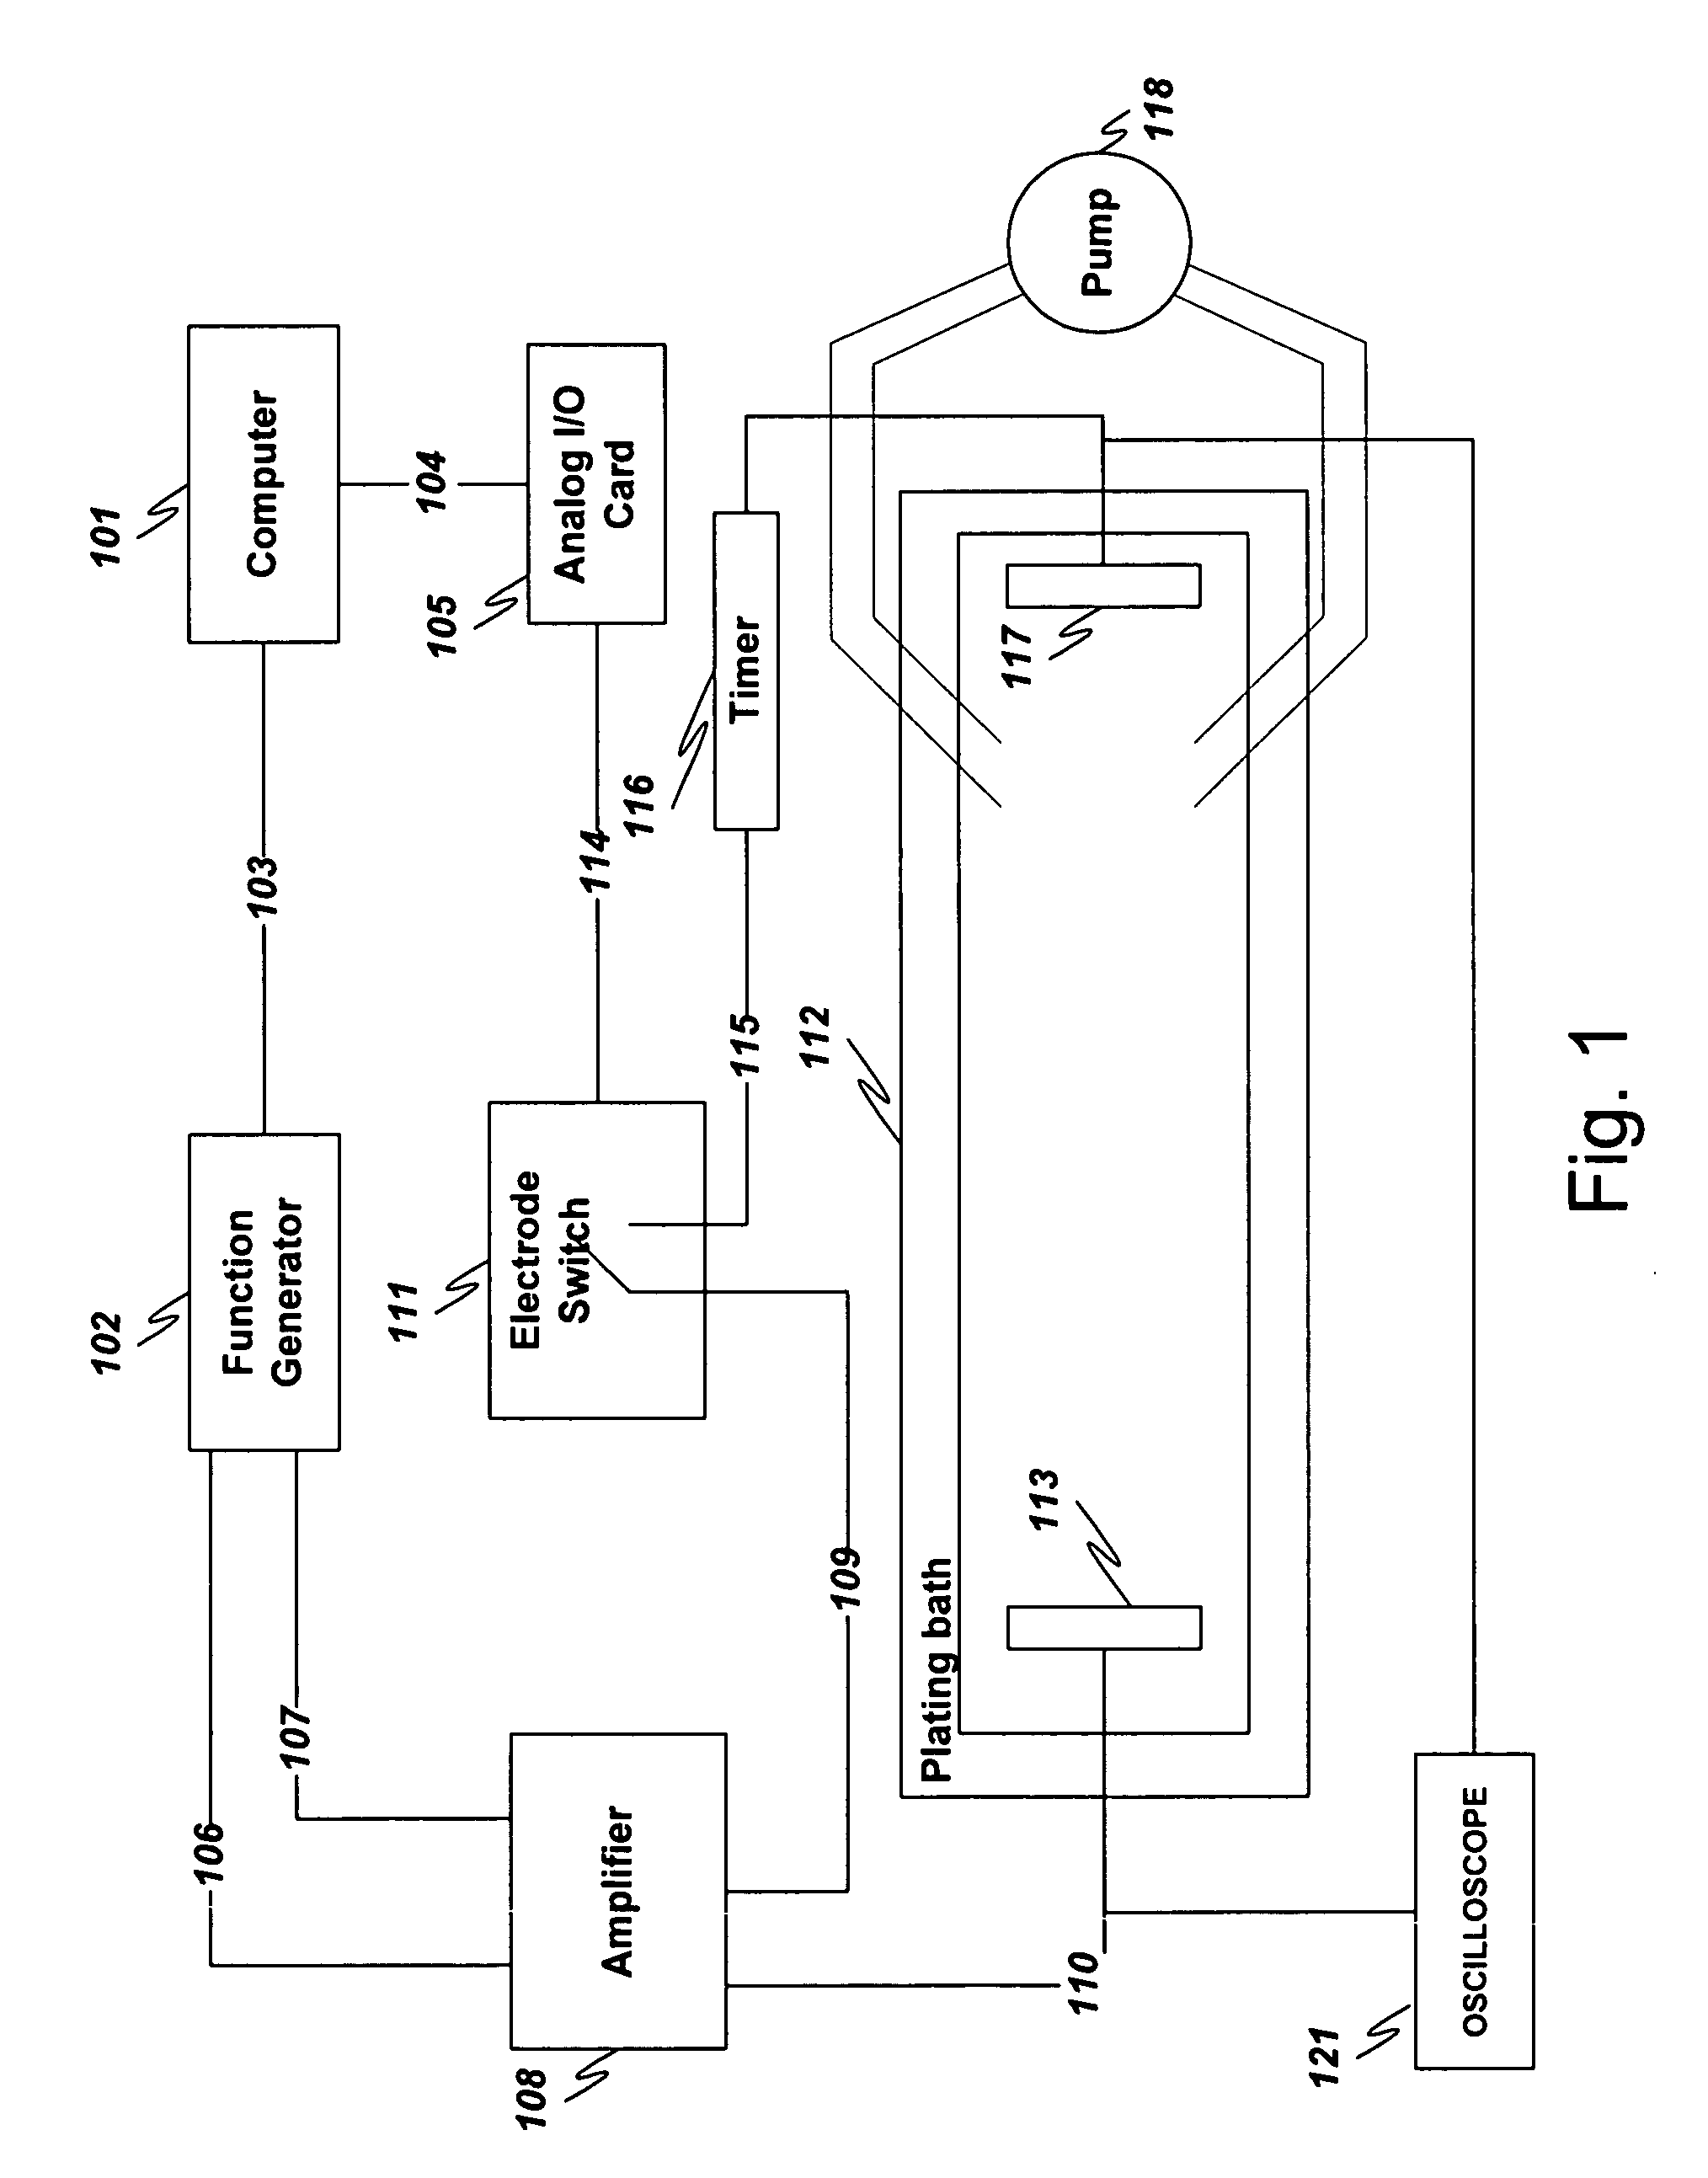 Method of patterning ultra-small structures